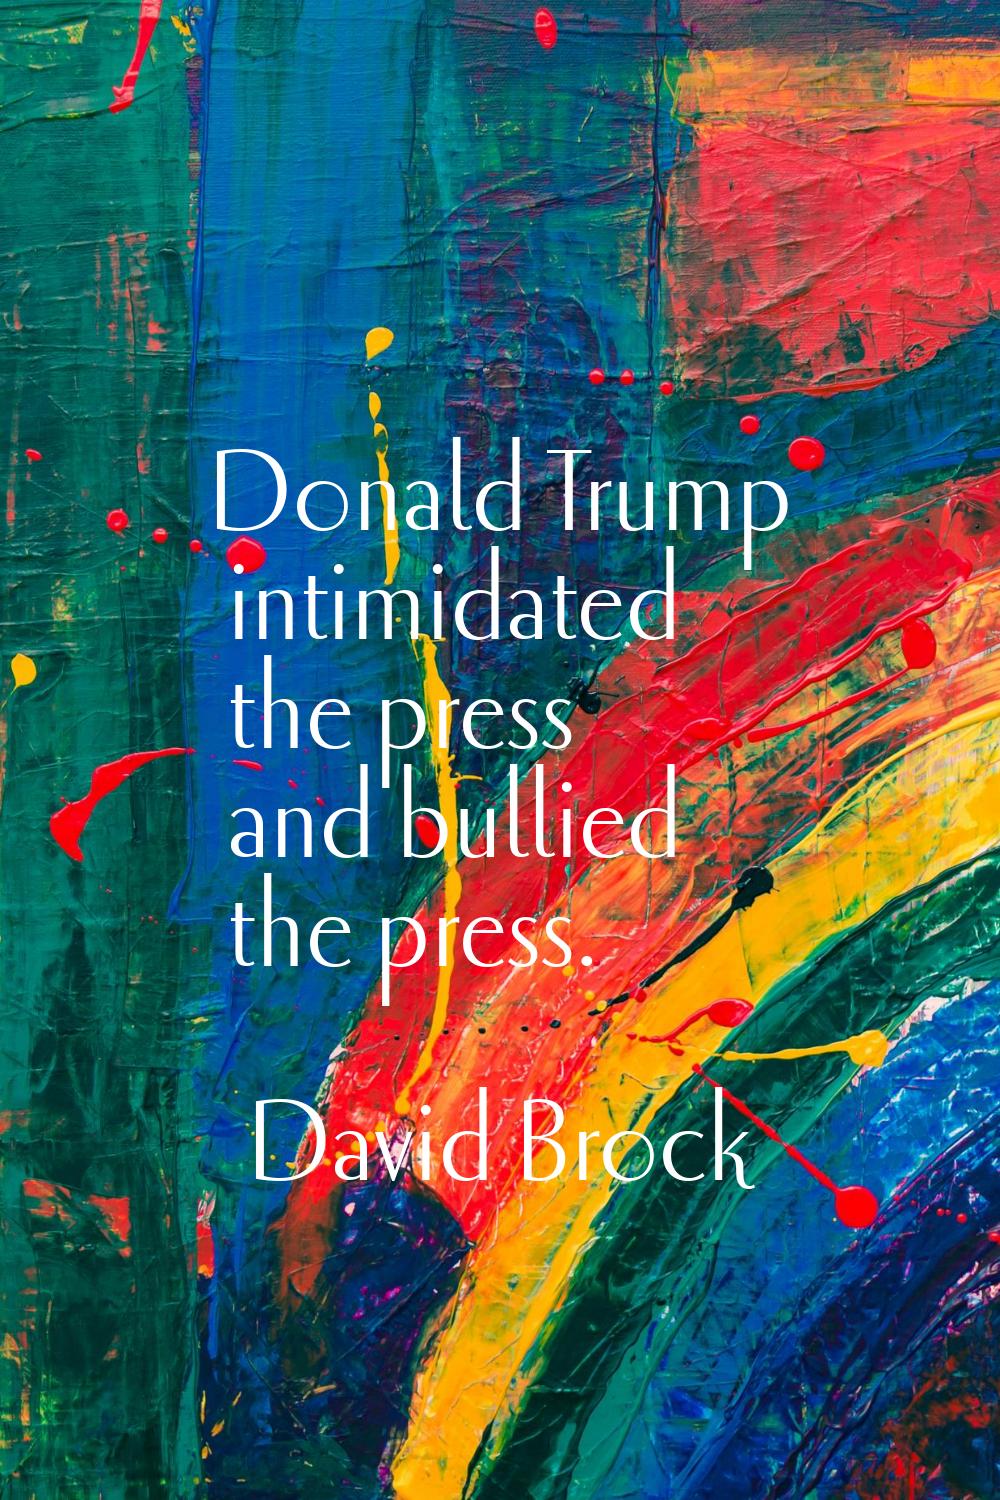 Donald Trump intimidated the press and bullied the press.